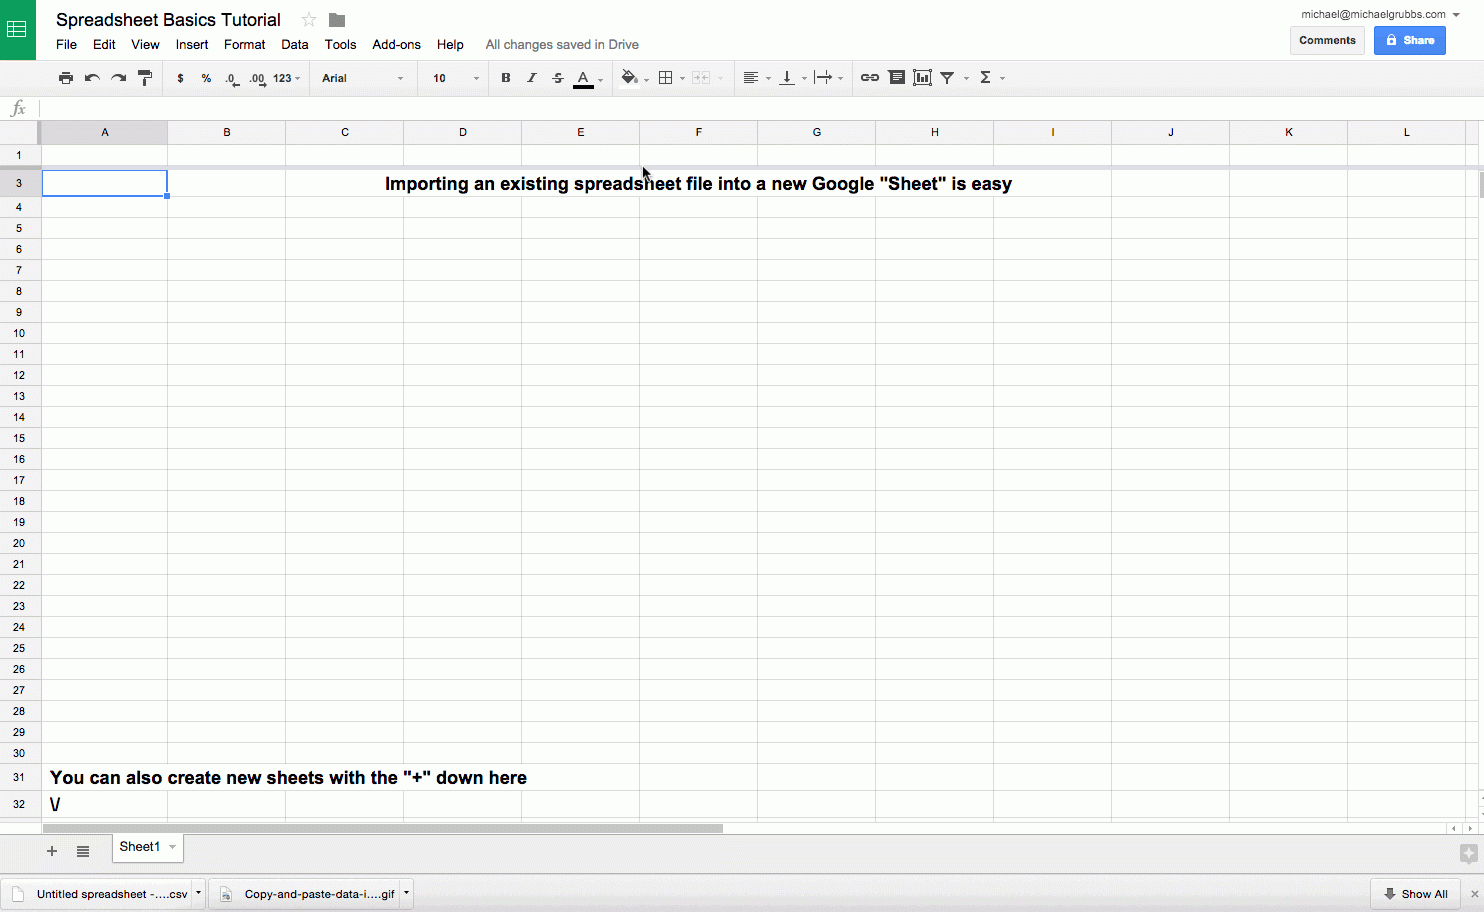 Learn How To Do Spreadsheets With Google Sheets 101: The Beginner's Guide To Online Spreadsheets  The